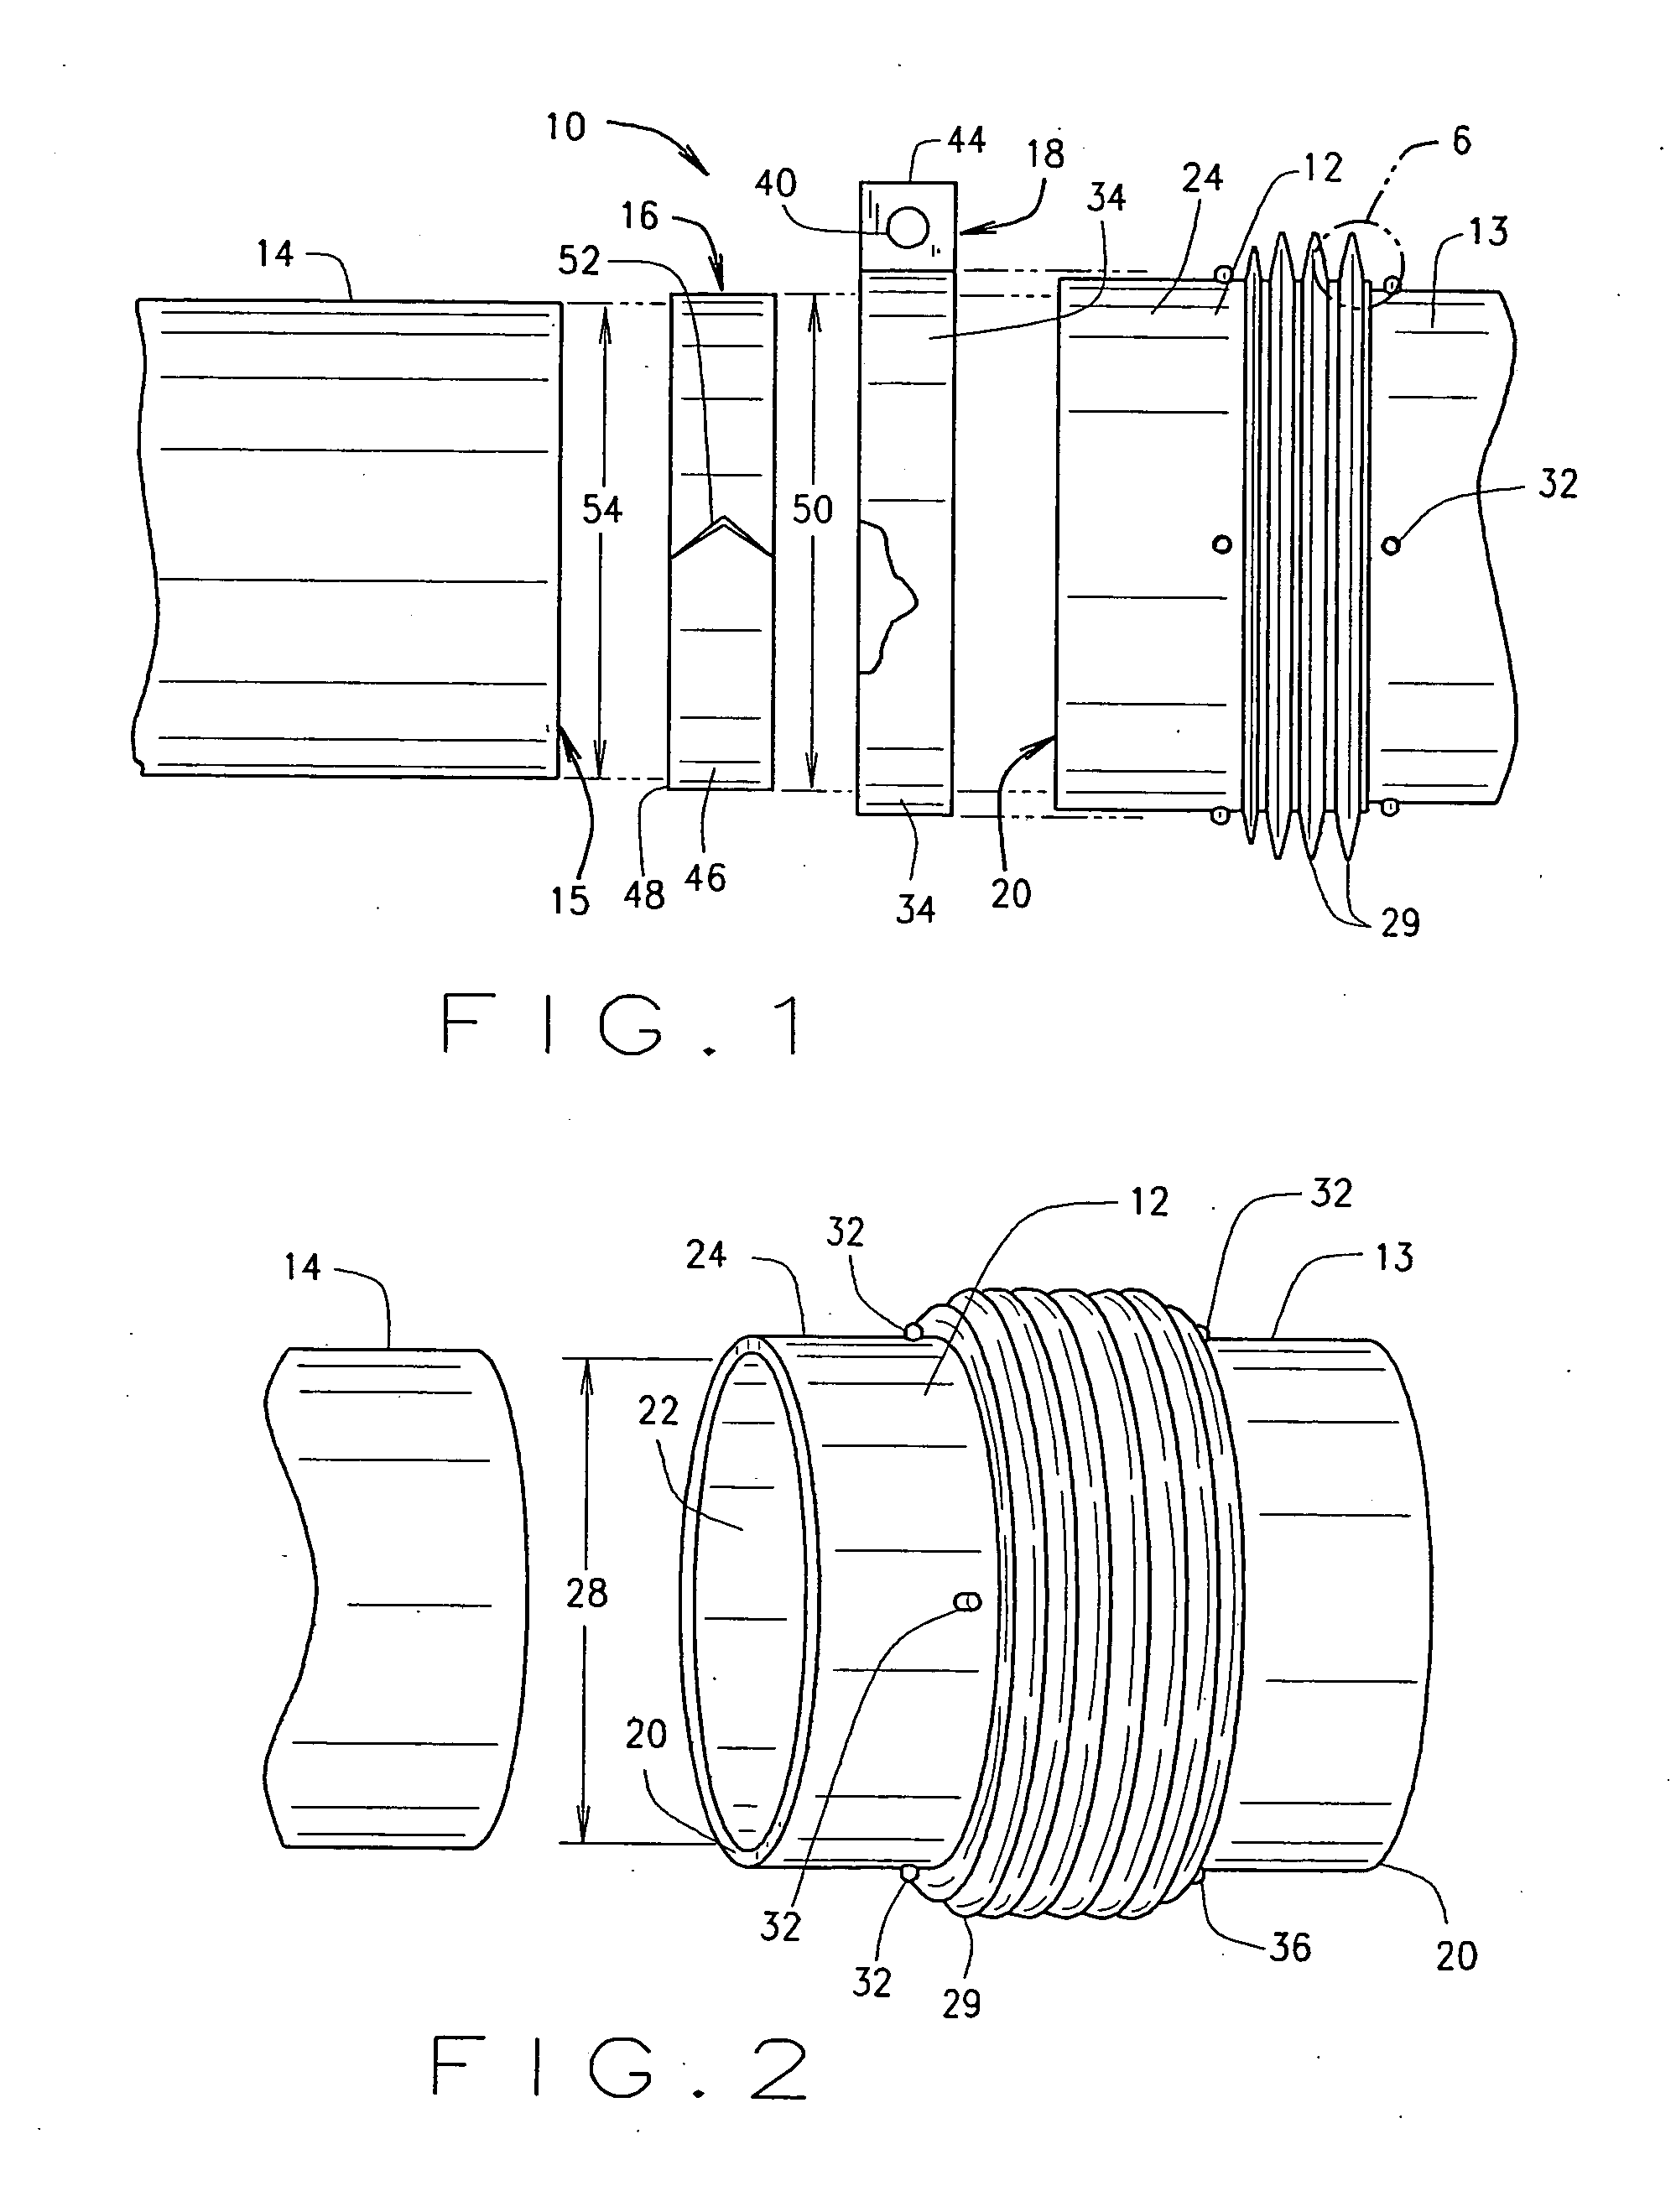 Exhaust pipe joint with insert